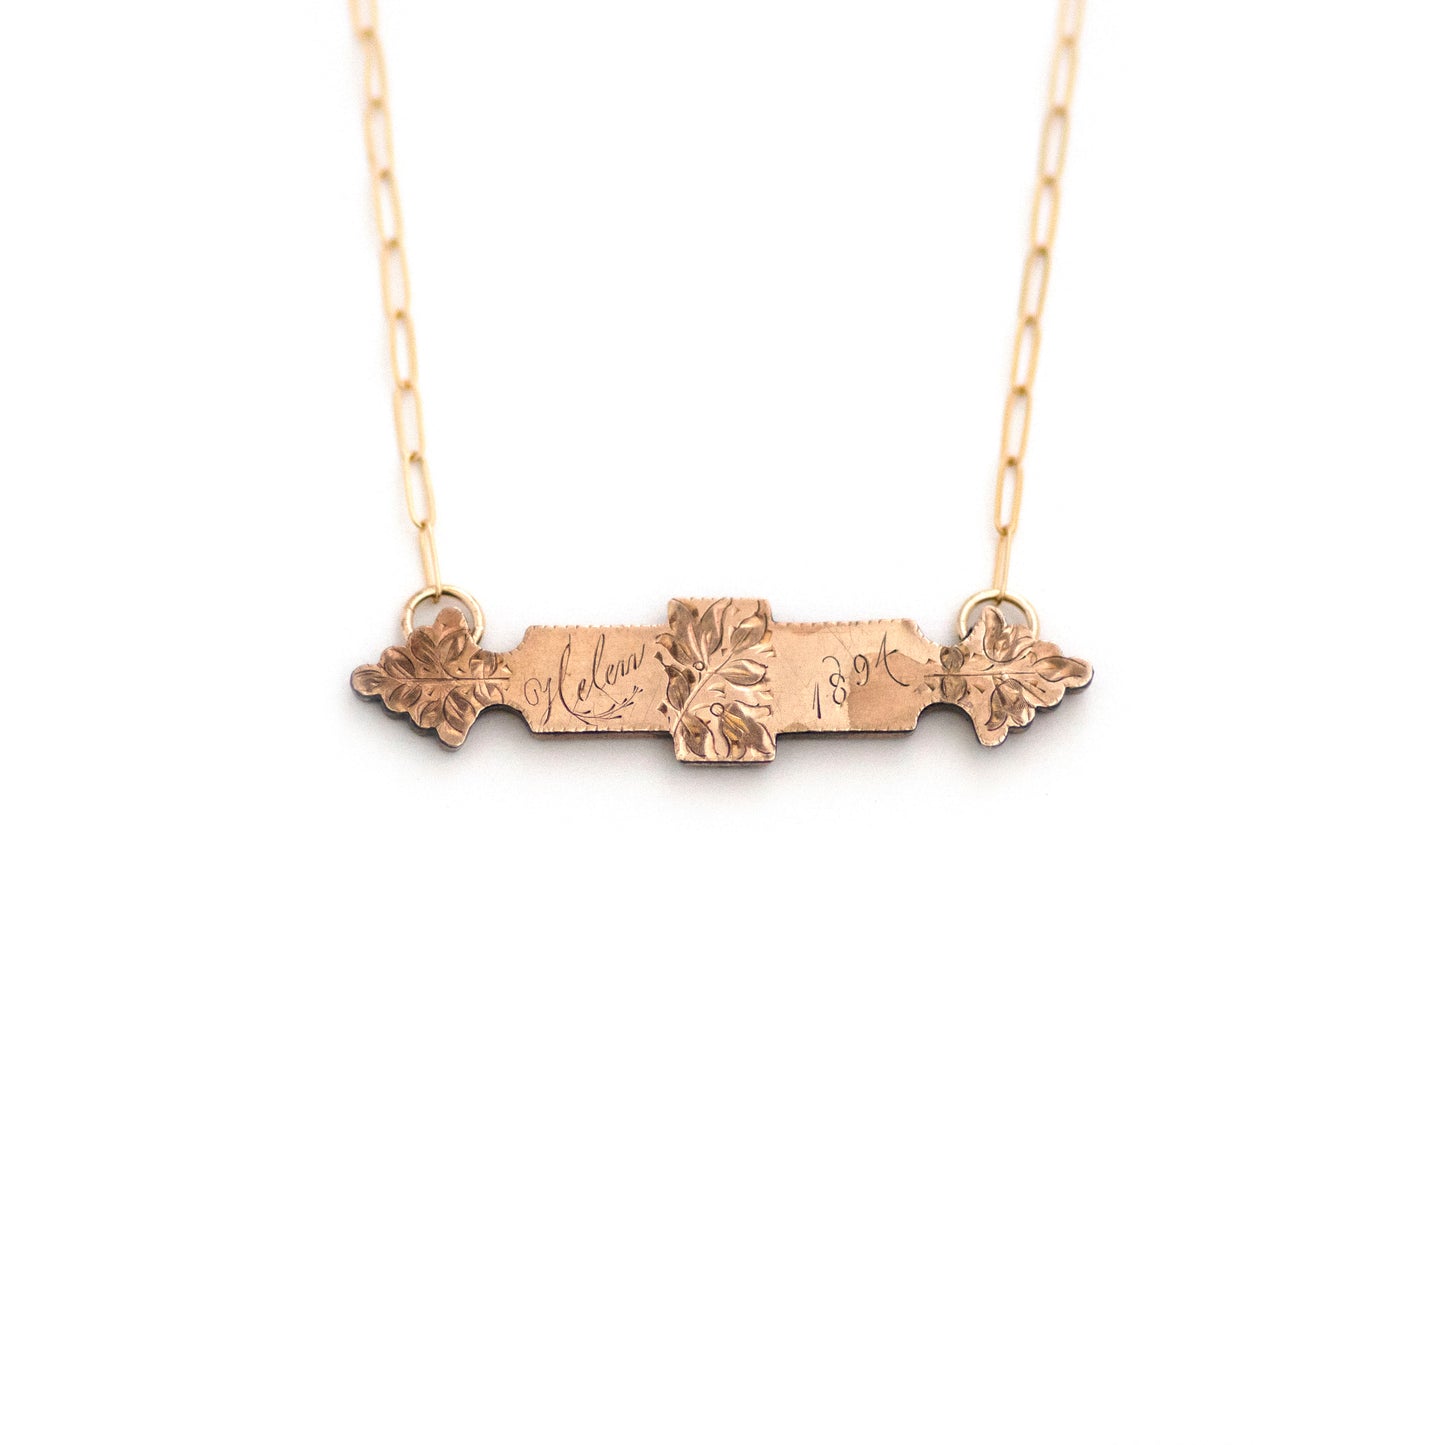 This one-of-a-kind conversion necklace is made up of:  Gold filled Victorian bar pin pendant from the late 1800s with floral details, the name "Helen", and the year "1894".